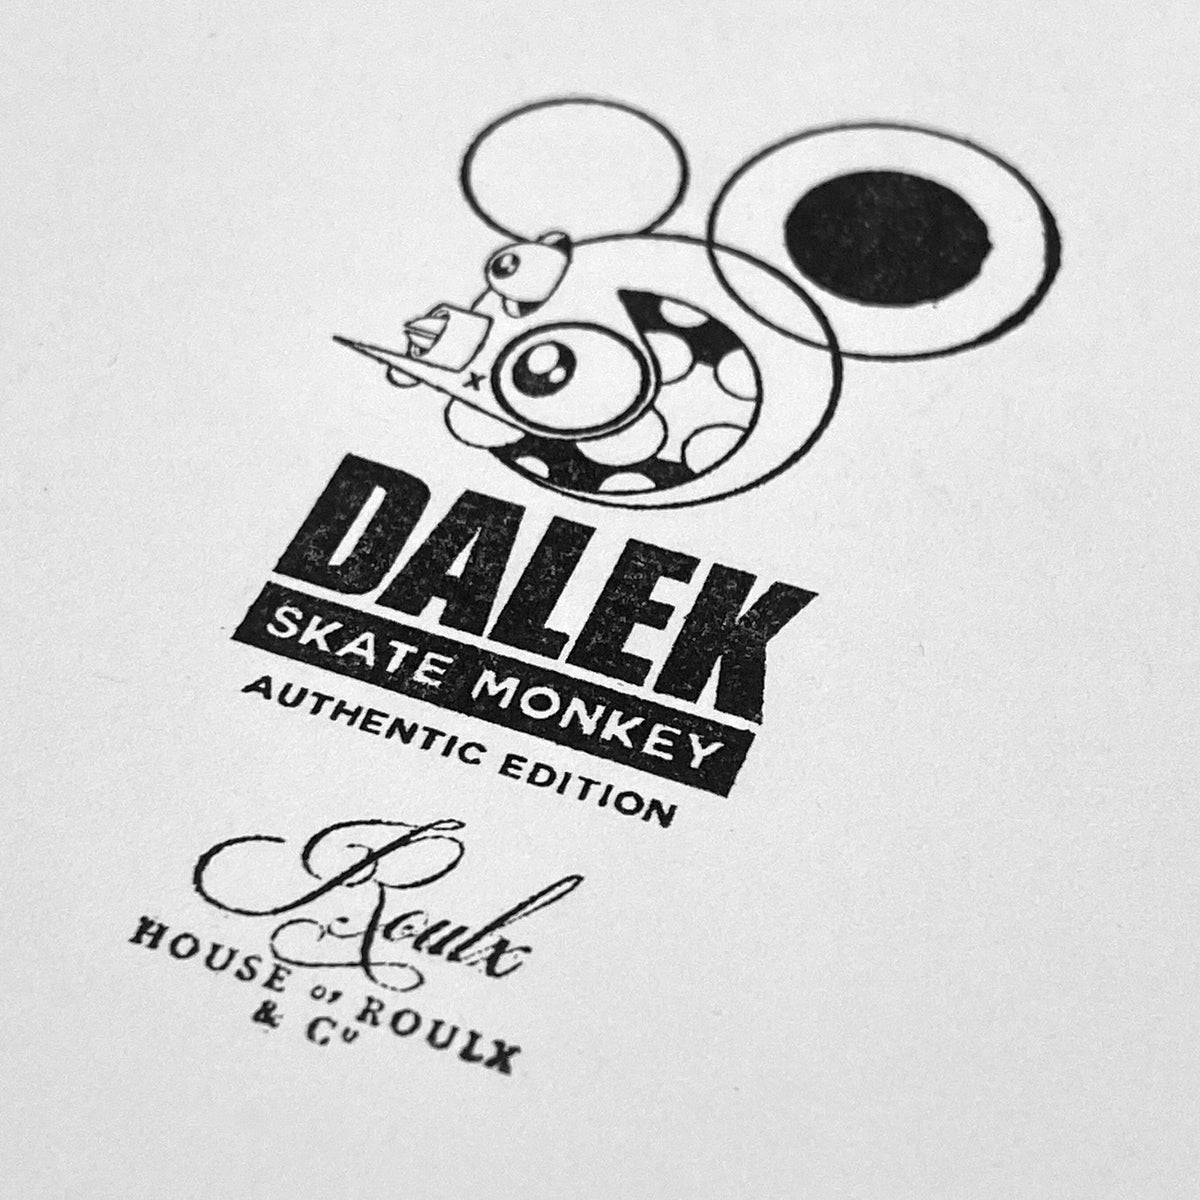 DALEK &quot;SKATE MONKEY&quot; - 12 Color Screen Printed Edition of 75 - 18 x 24&quot;